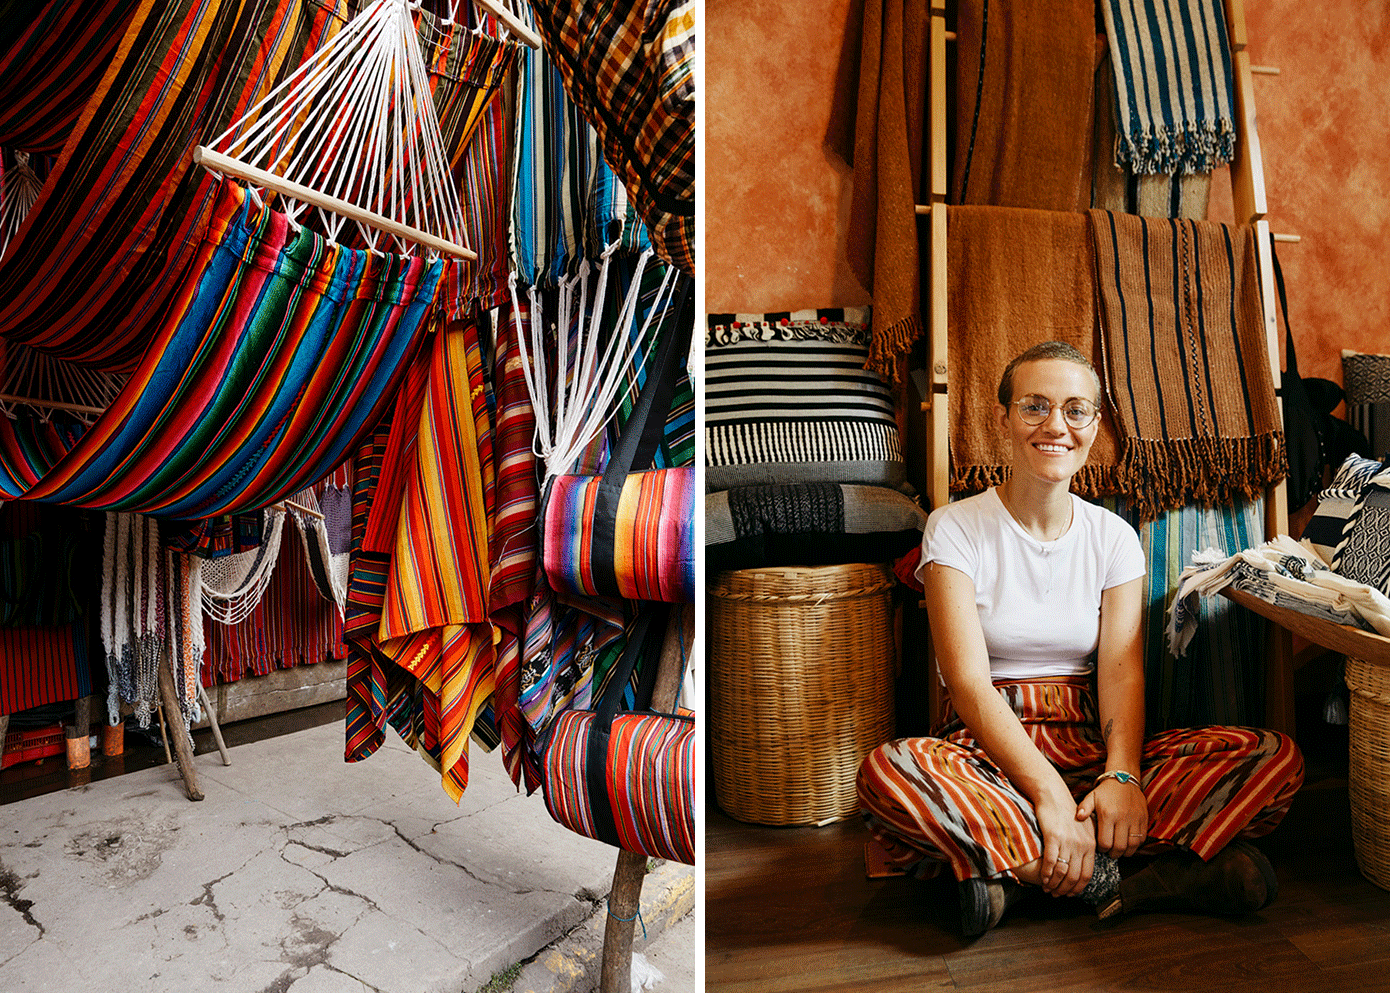 On the left, brighly colored woven hammocks hung in a store. On the right, a young woman sitting in front of woven textiles. 